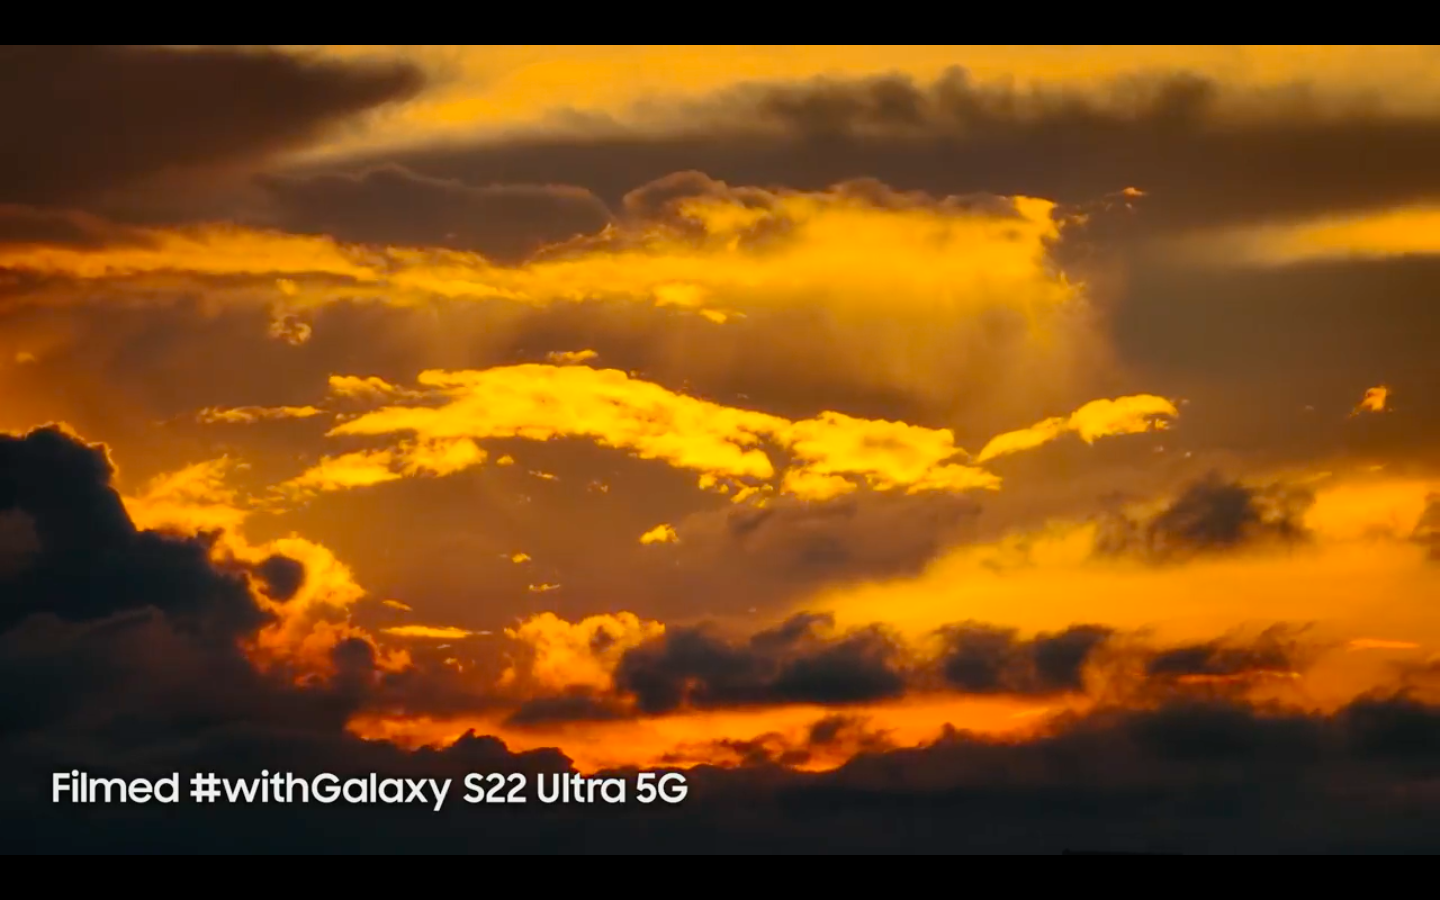 Filmed #withGalaxy S22 Ultra 5G.